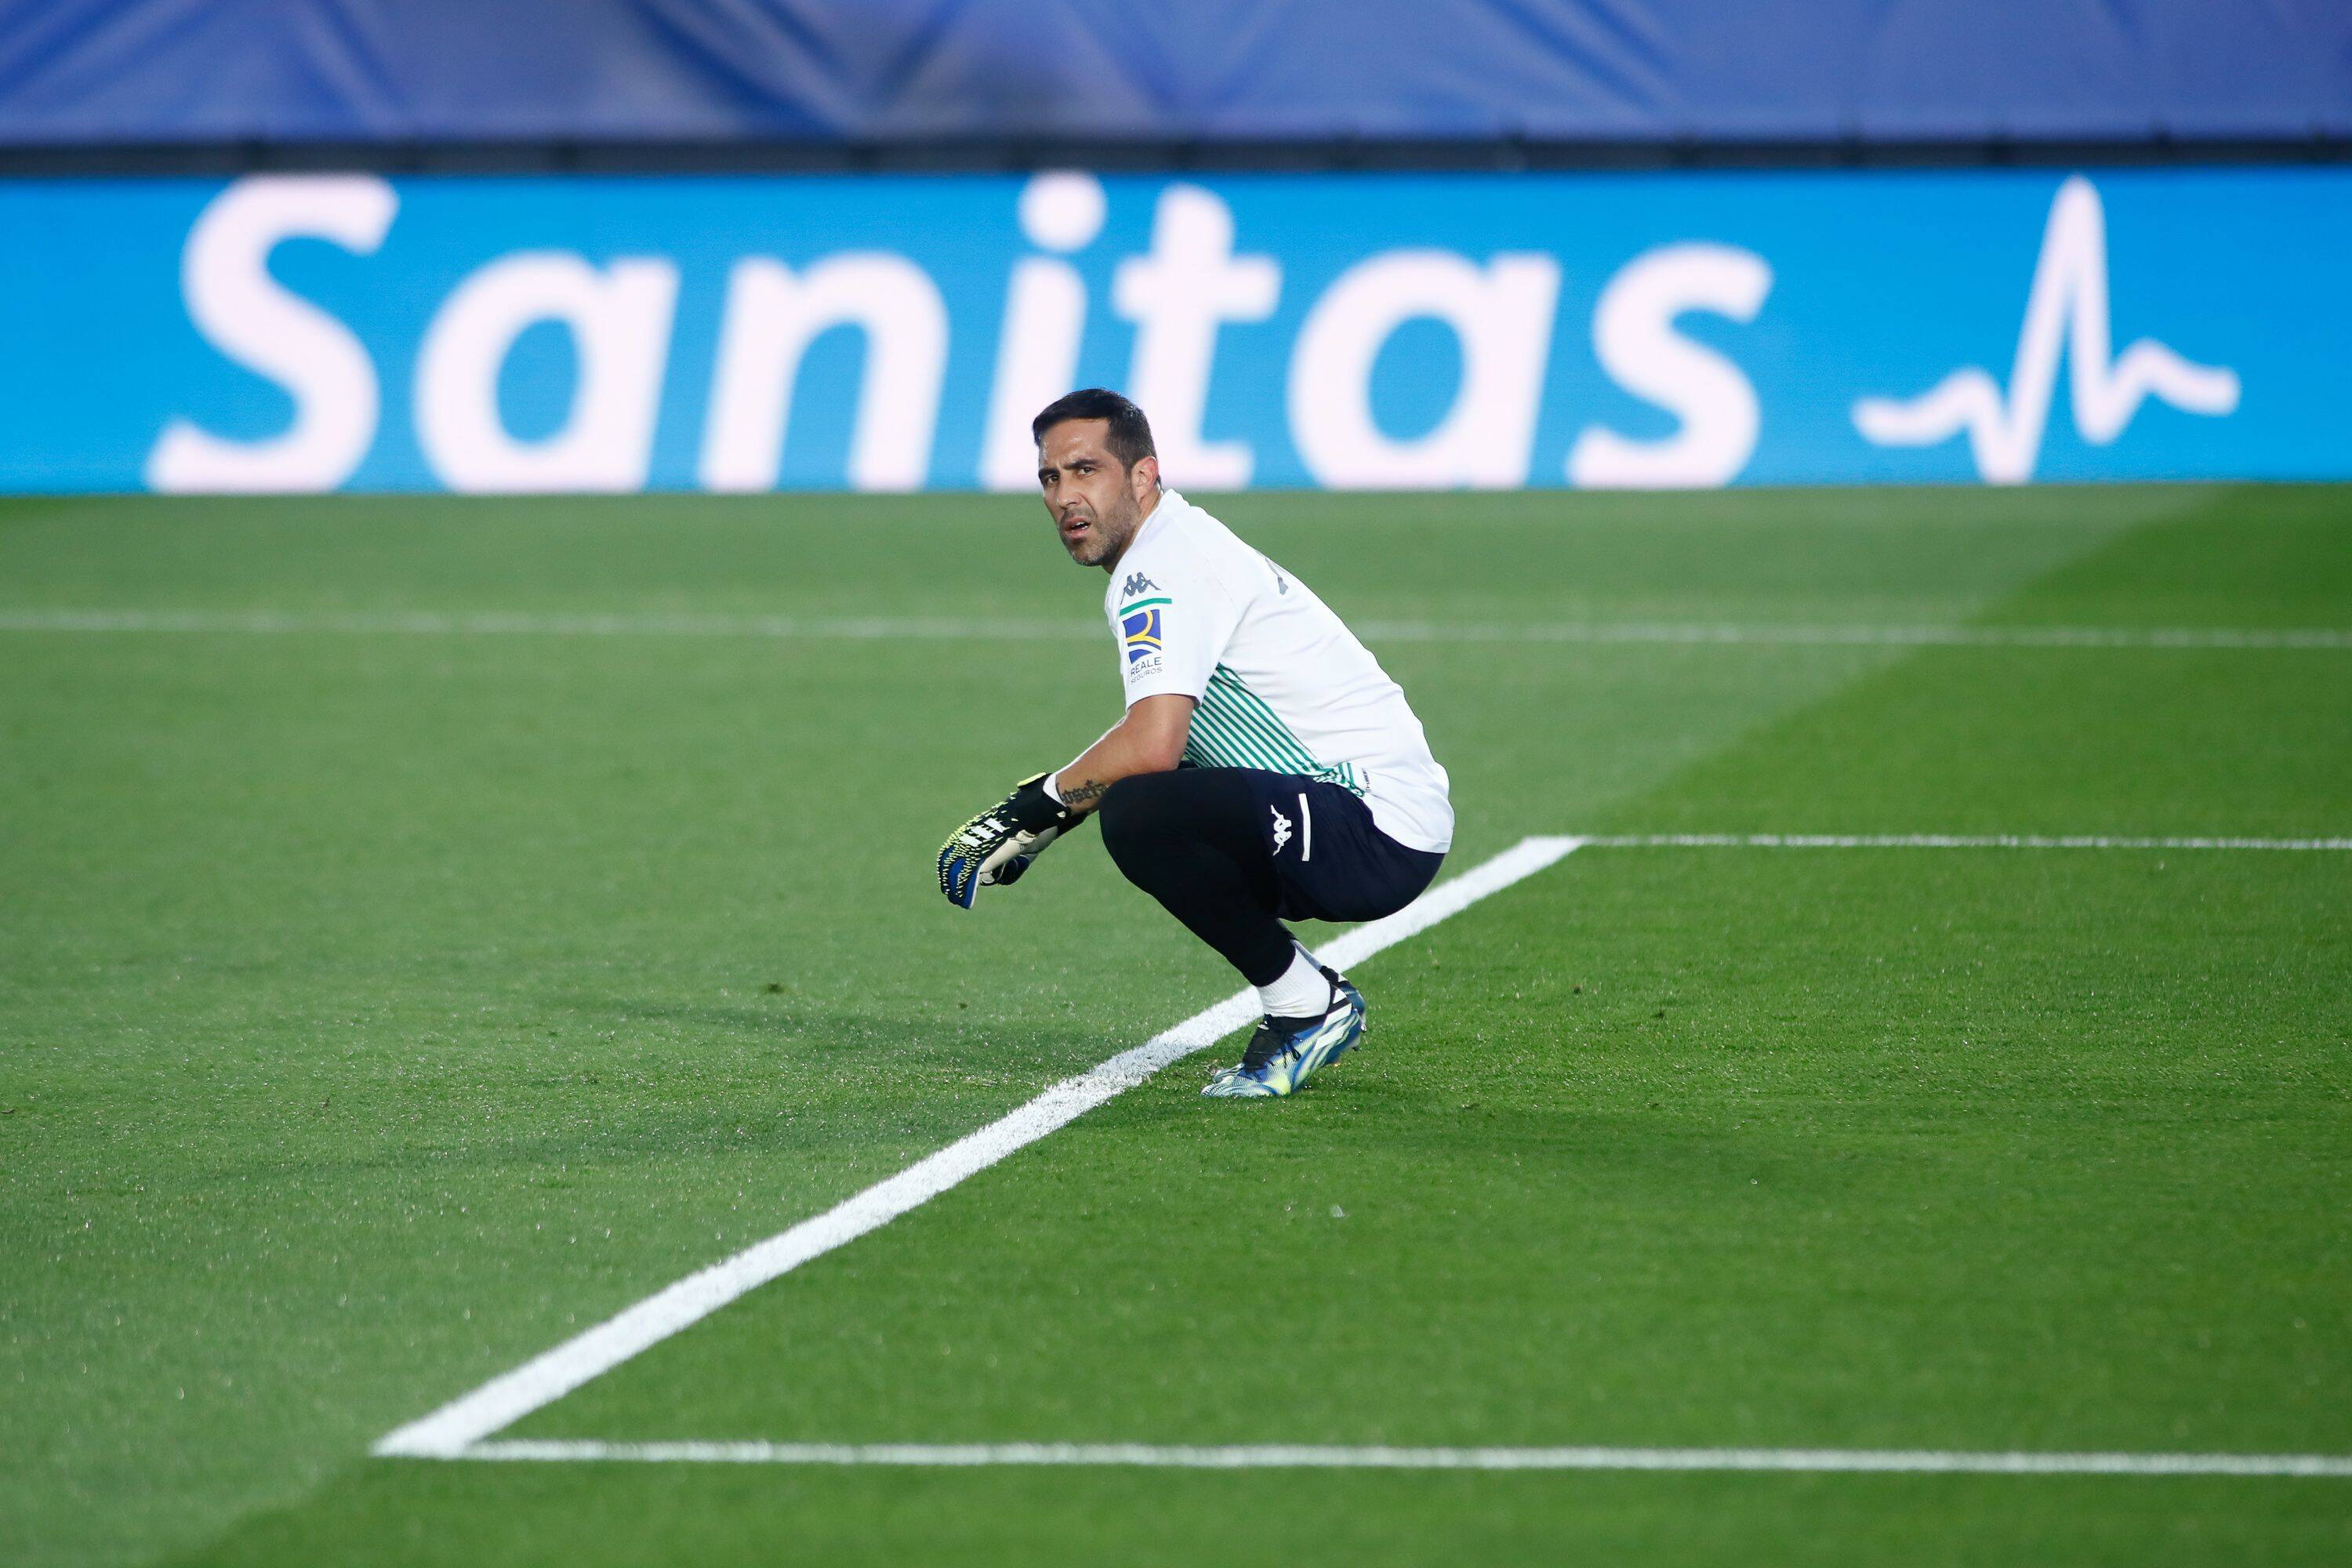 Mandatory Credit: Photo By Oscar J Barroso/shutterstock (11874190a) Claudio Bravo Of Real Betis Warms Up During The Span